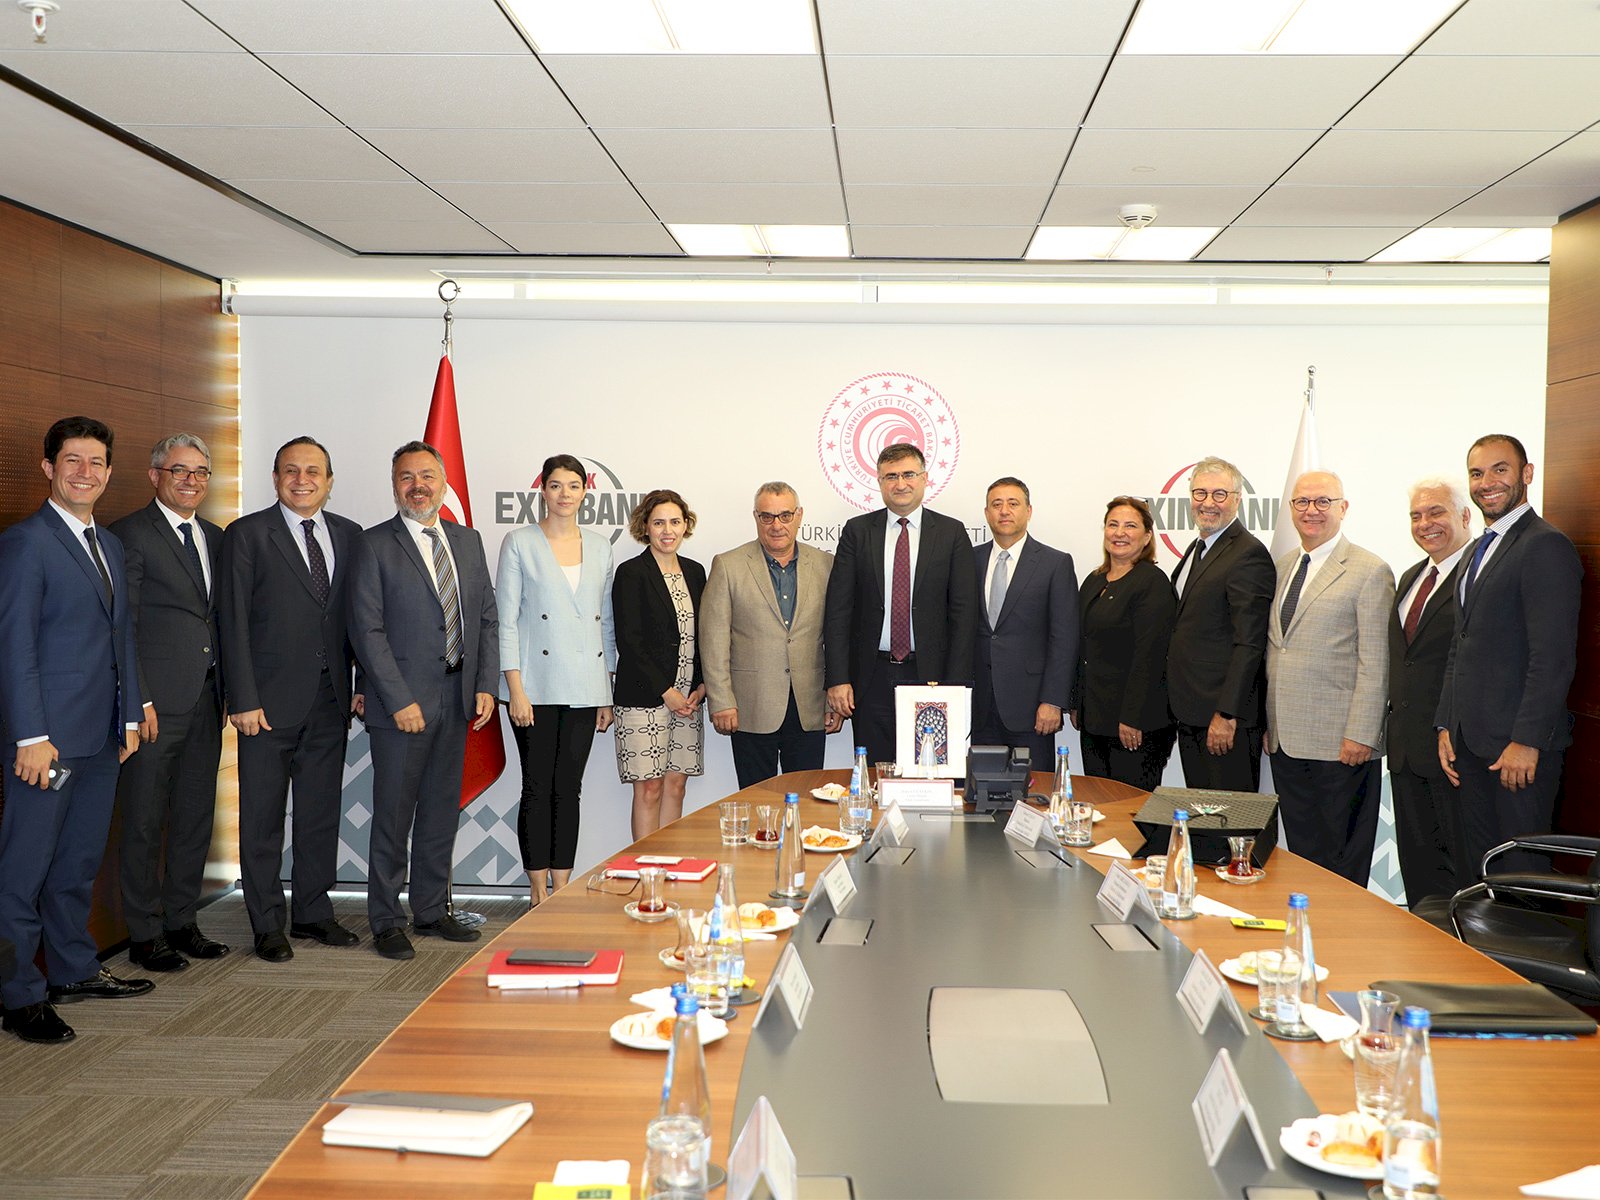 TEM – TURKISH EXIMBANK MEETINGS July 25th,2019, September 11th,2019, January 17th,2020 and May 8th,2020